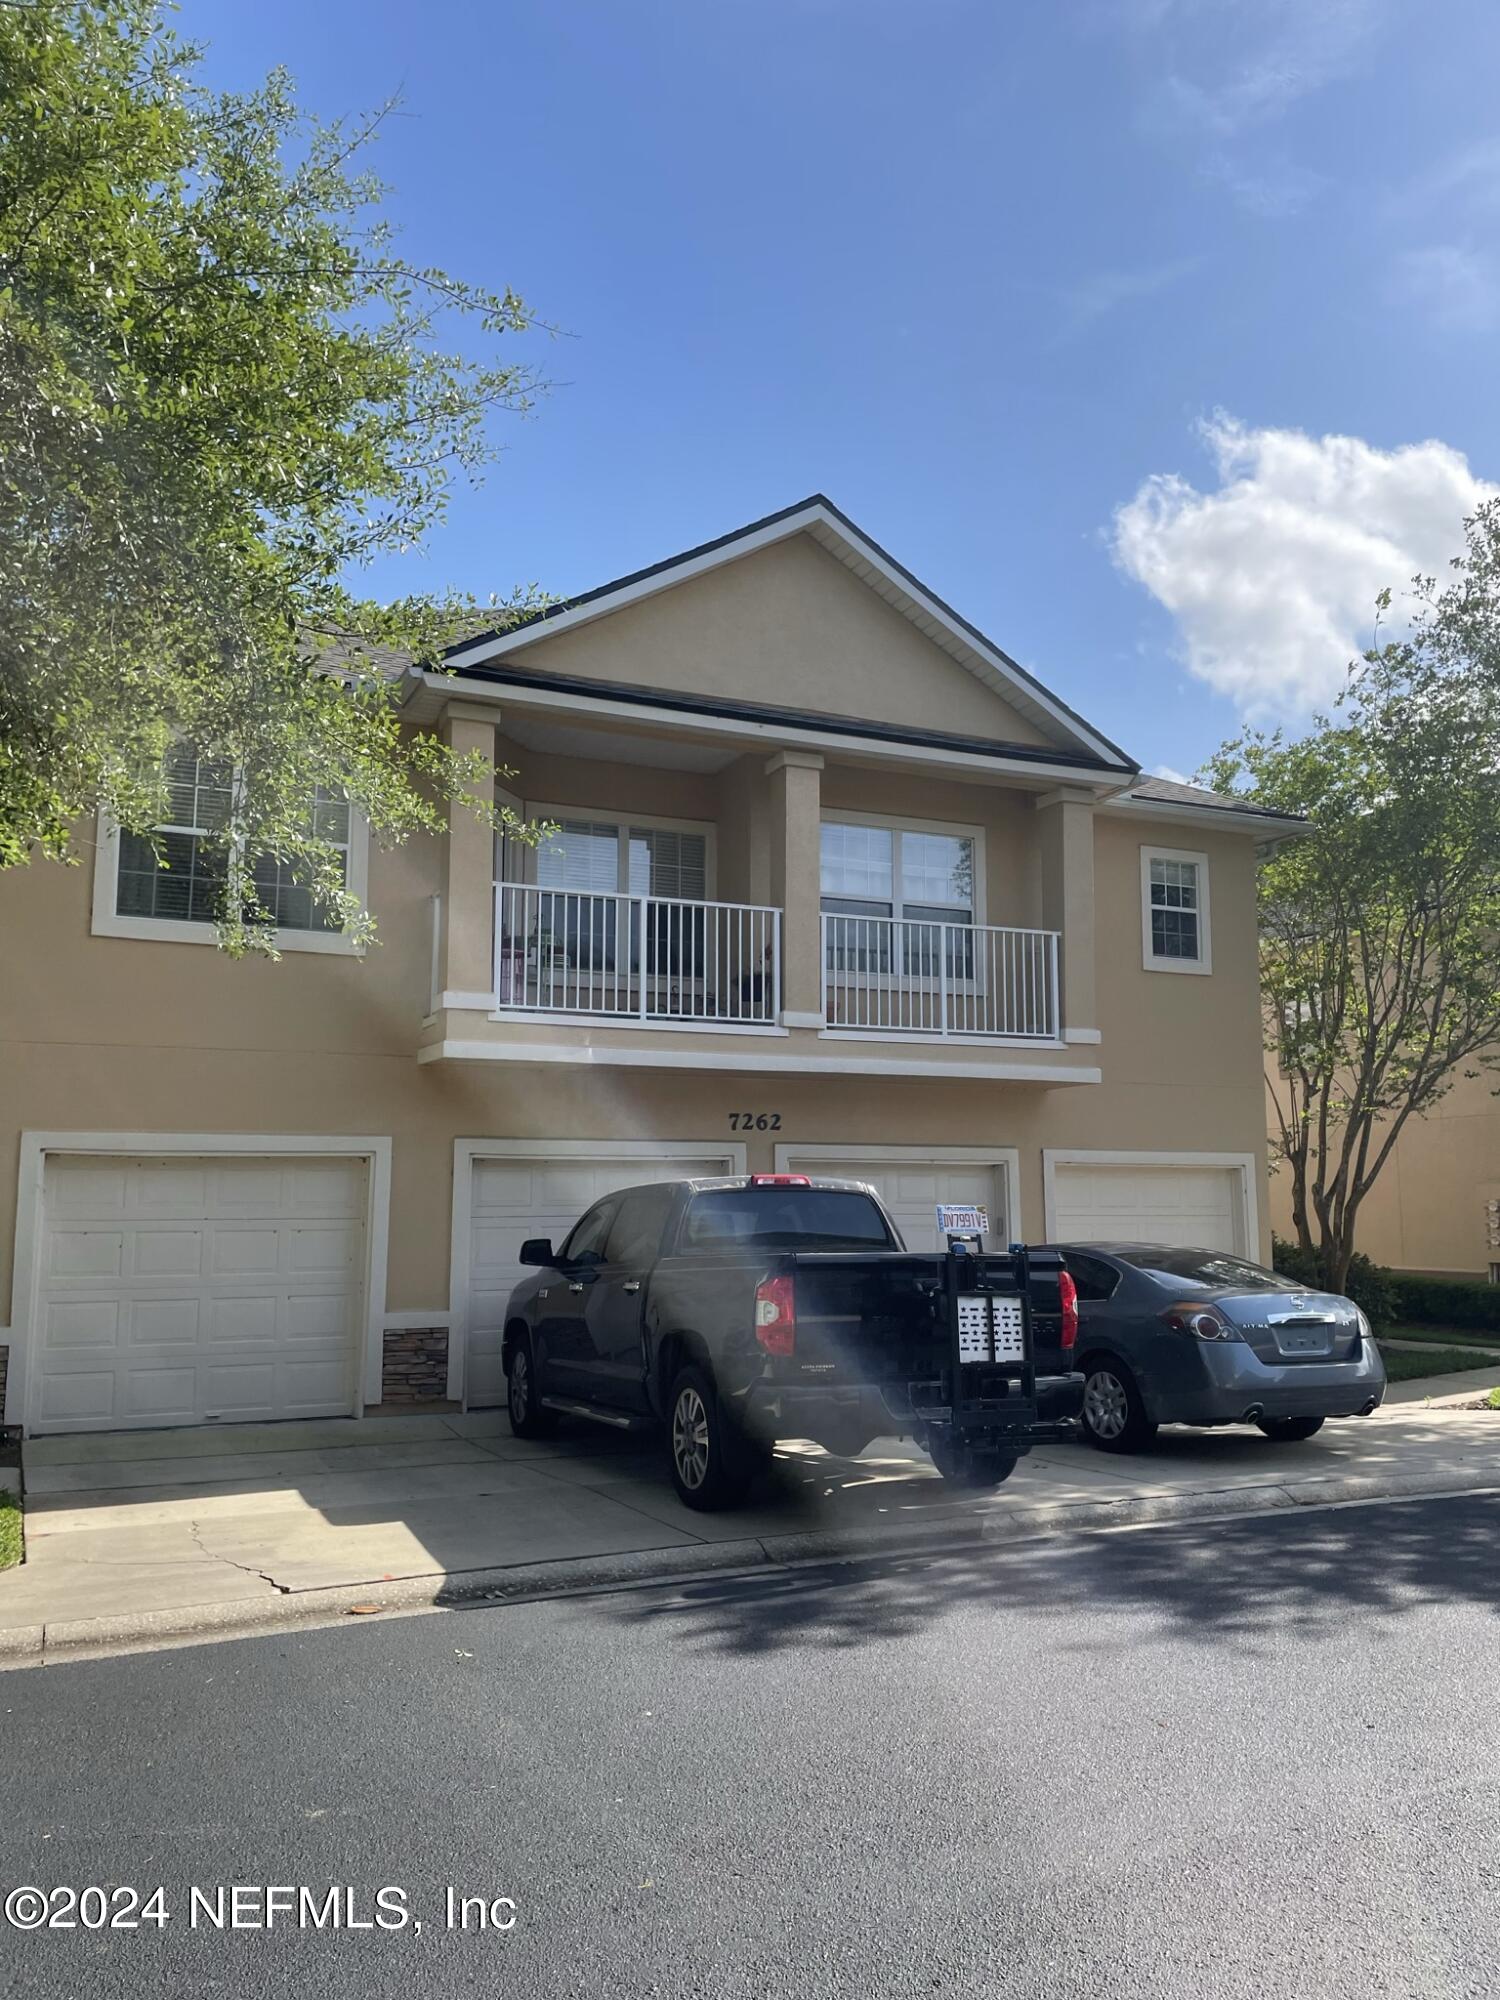 Jacksonville, FL home for sale located at 7262 Deerfoot Point Circle Unit 2-3, Jacksonville, FL 32256